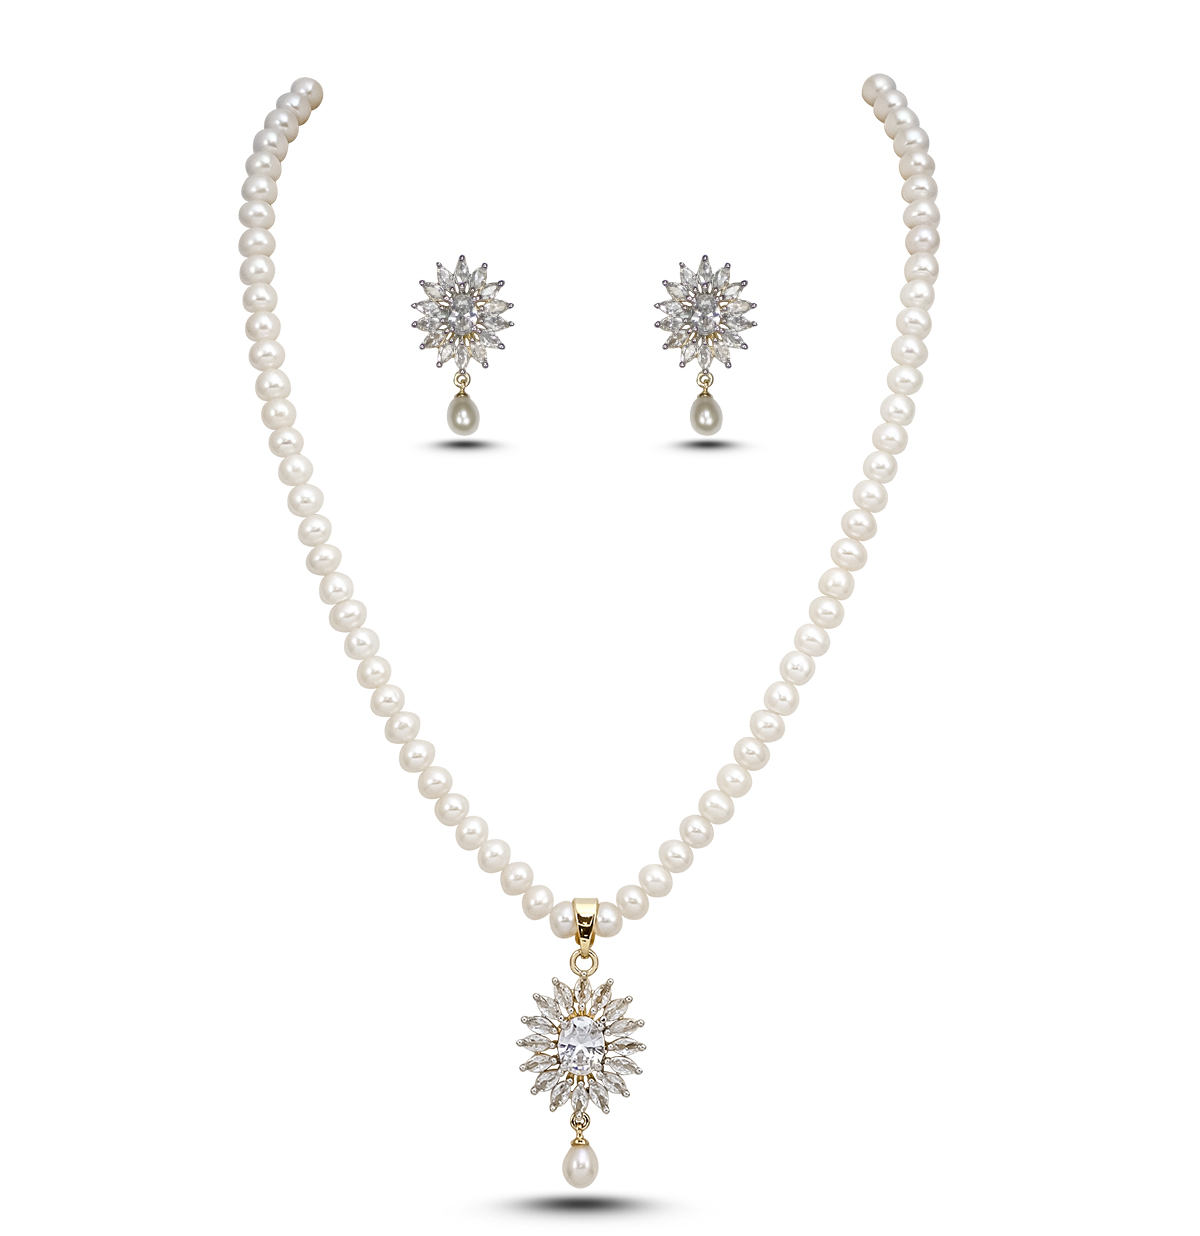 Persica conch pearl necklace, earrings and ring suite | Sarah Ho | The  Jewellery Editor